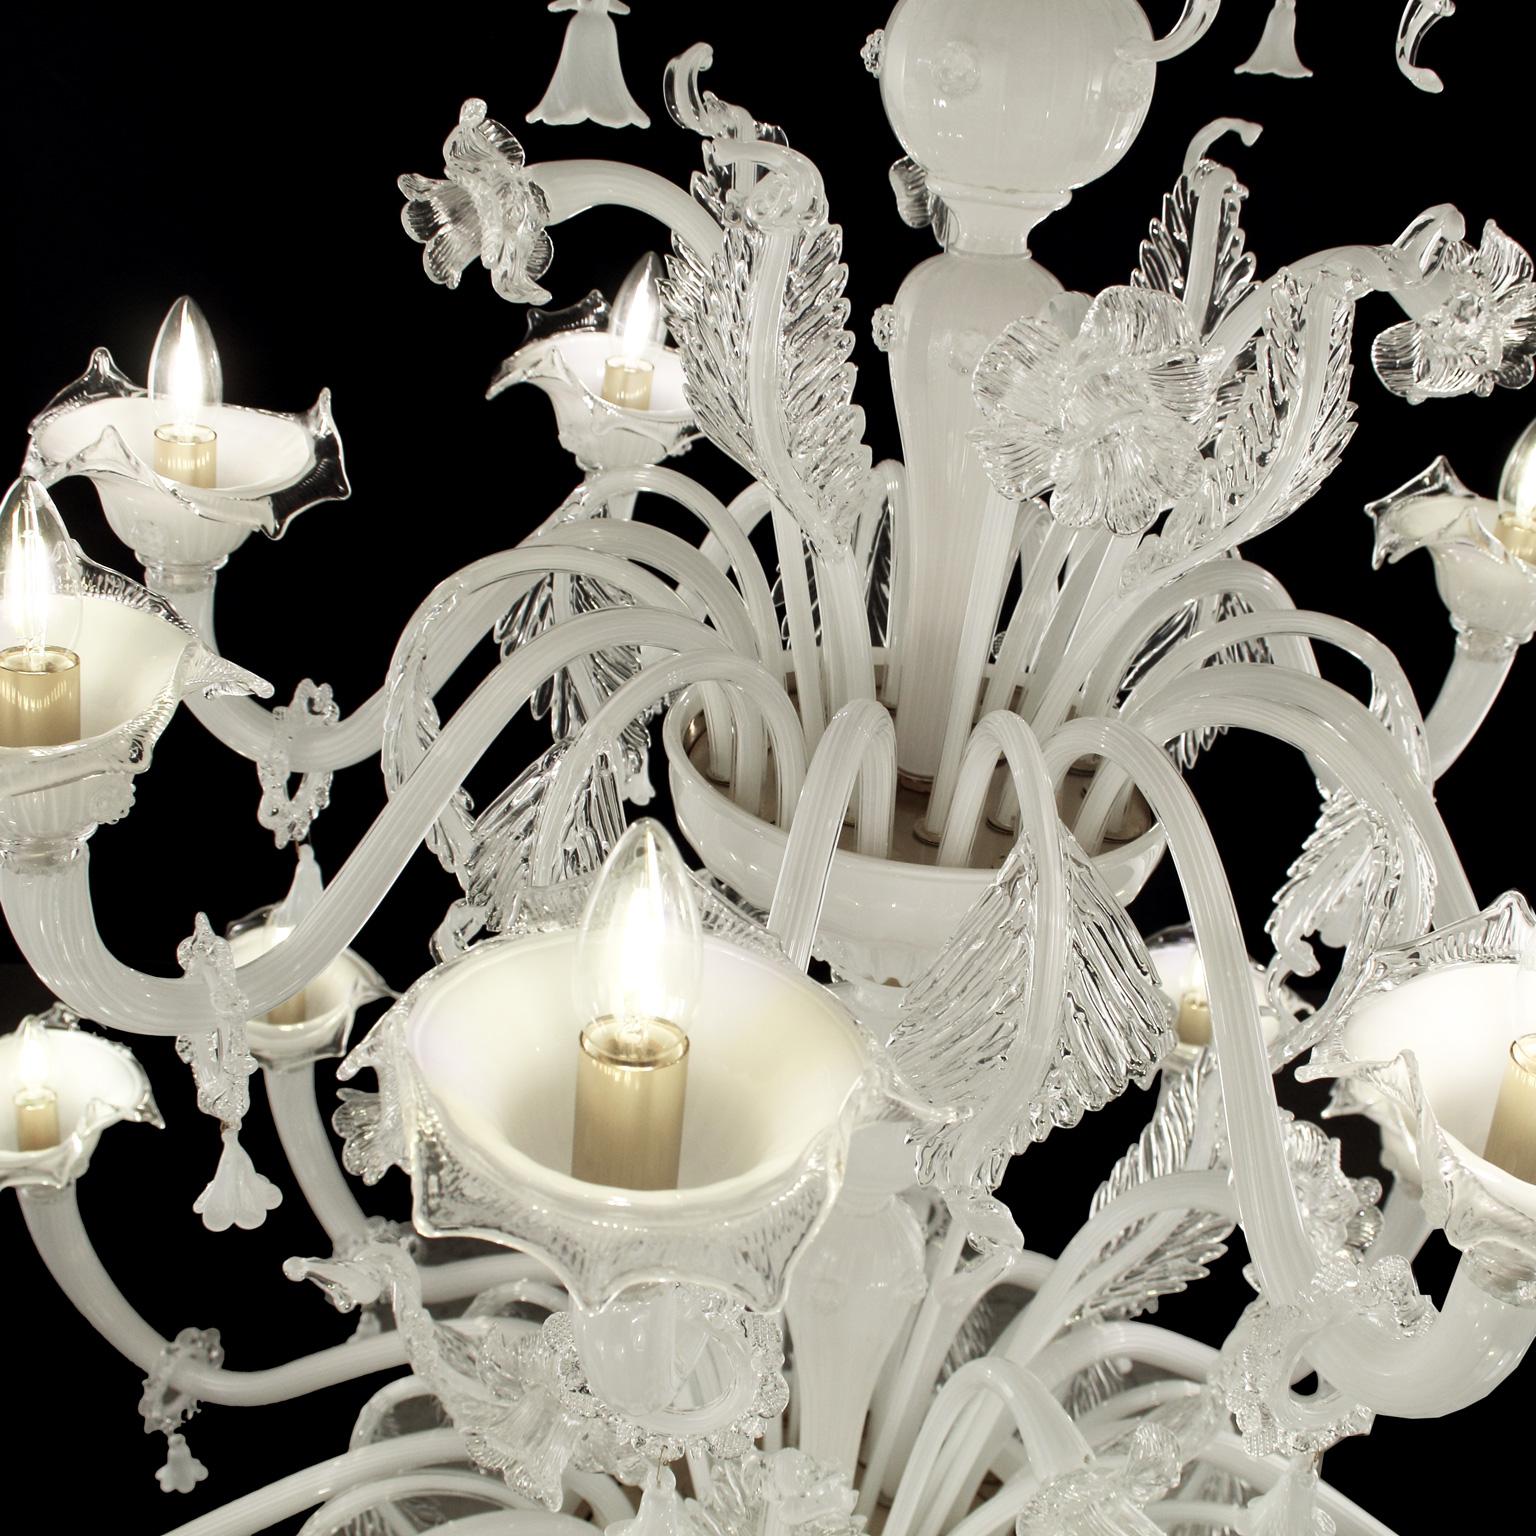 Bovary chandelier, 16+8+4 lights, in encased white Murano glass by Multiforme is a luxury chandelier that will never be outmoded.

Bovary: a collection of handmade blown glass chandeliers and lamps which takes inspiration from the Classic floral